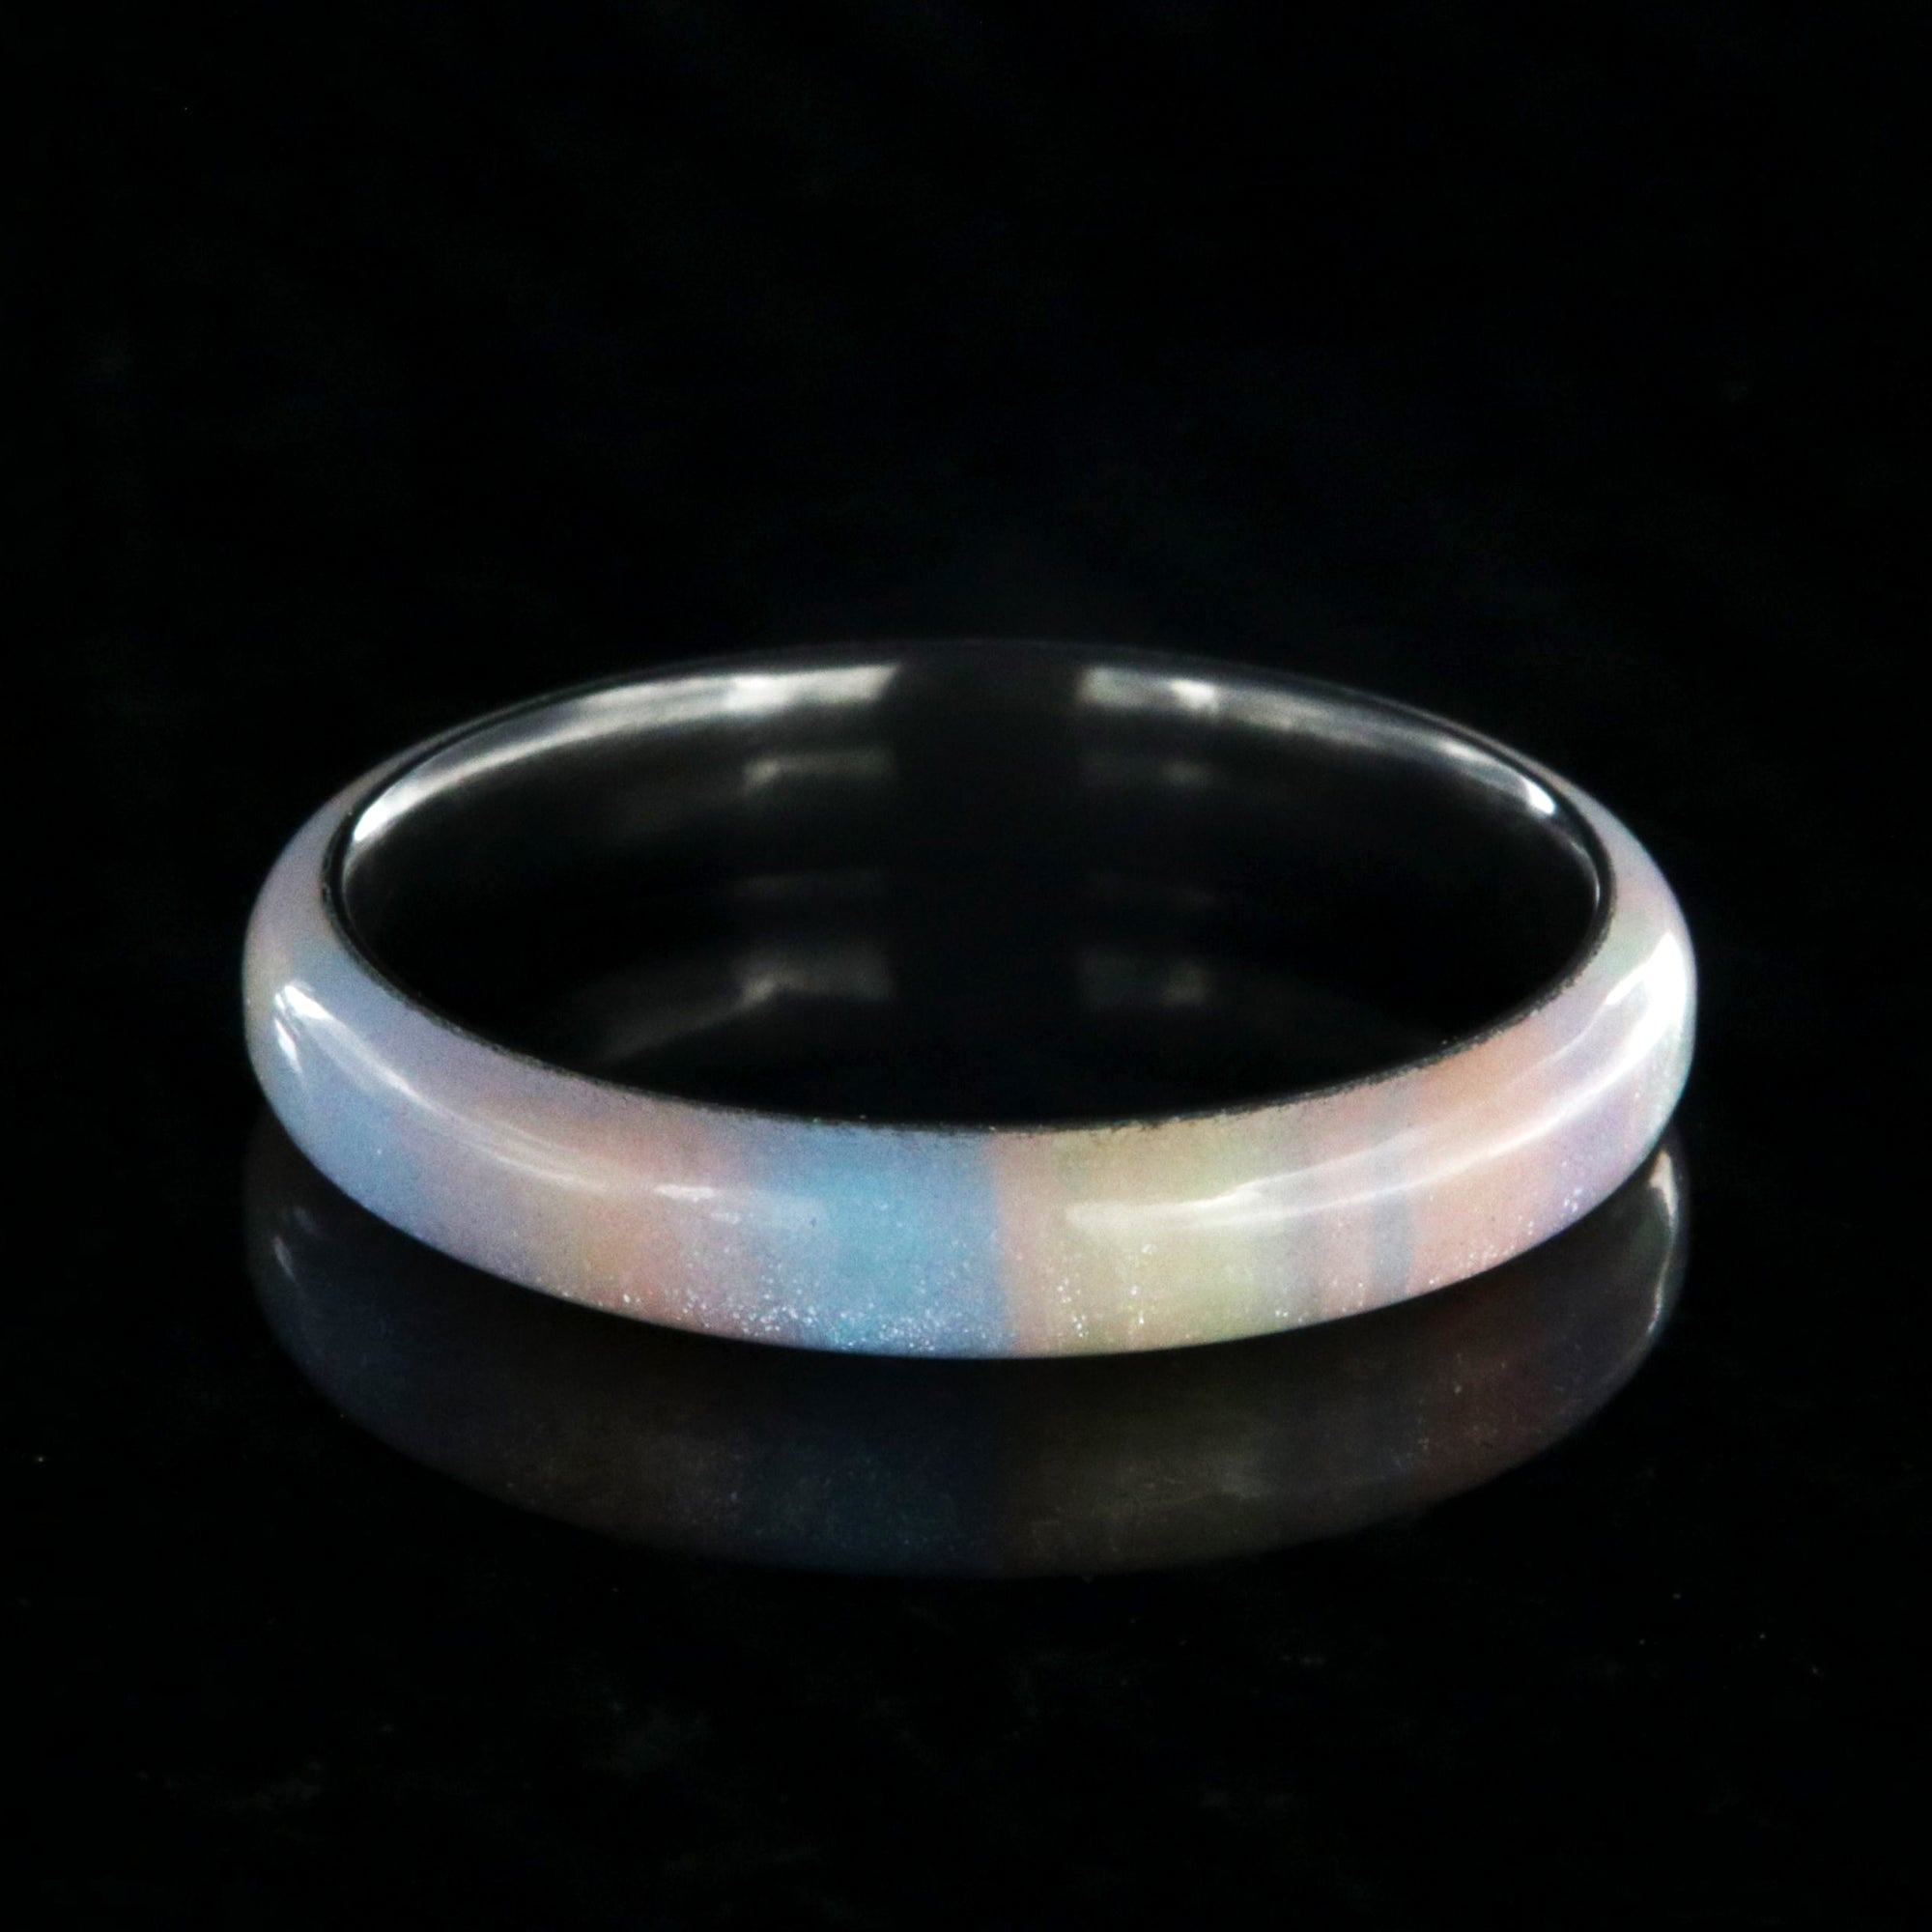 4mm wide promise ring with a rainbow outside and black zirconium sleeve